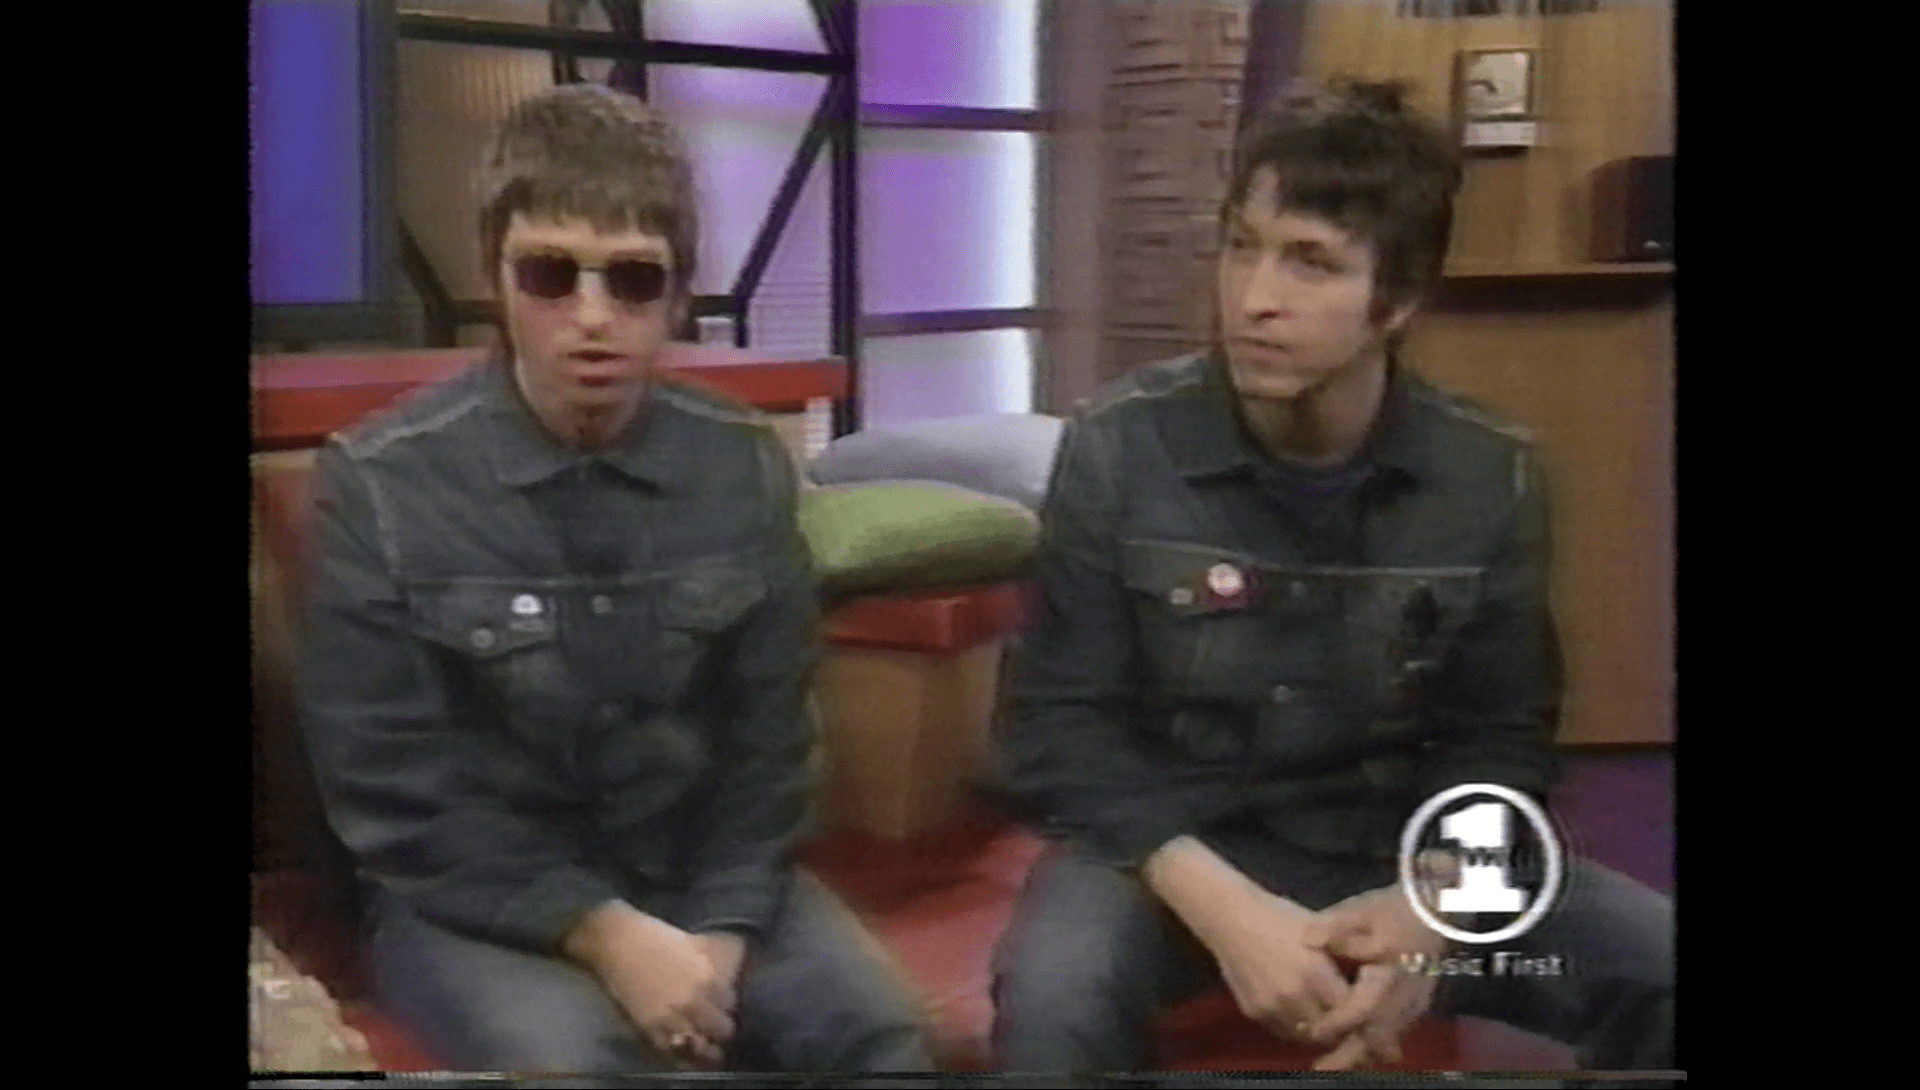 Oasis on The Daily One (VH1) - April 2000